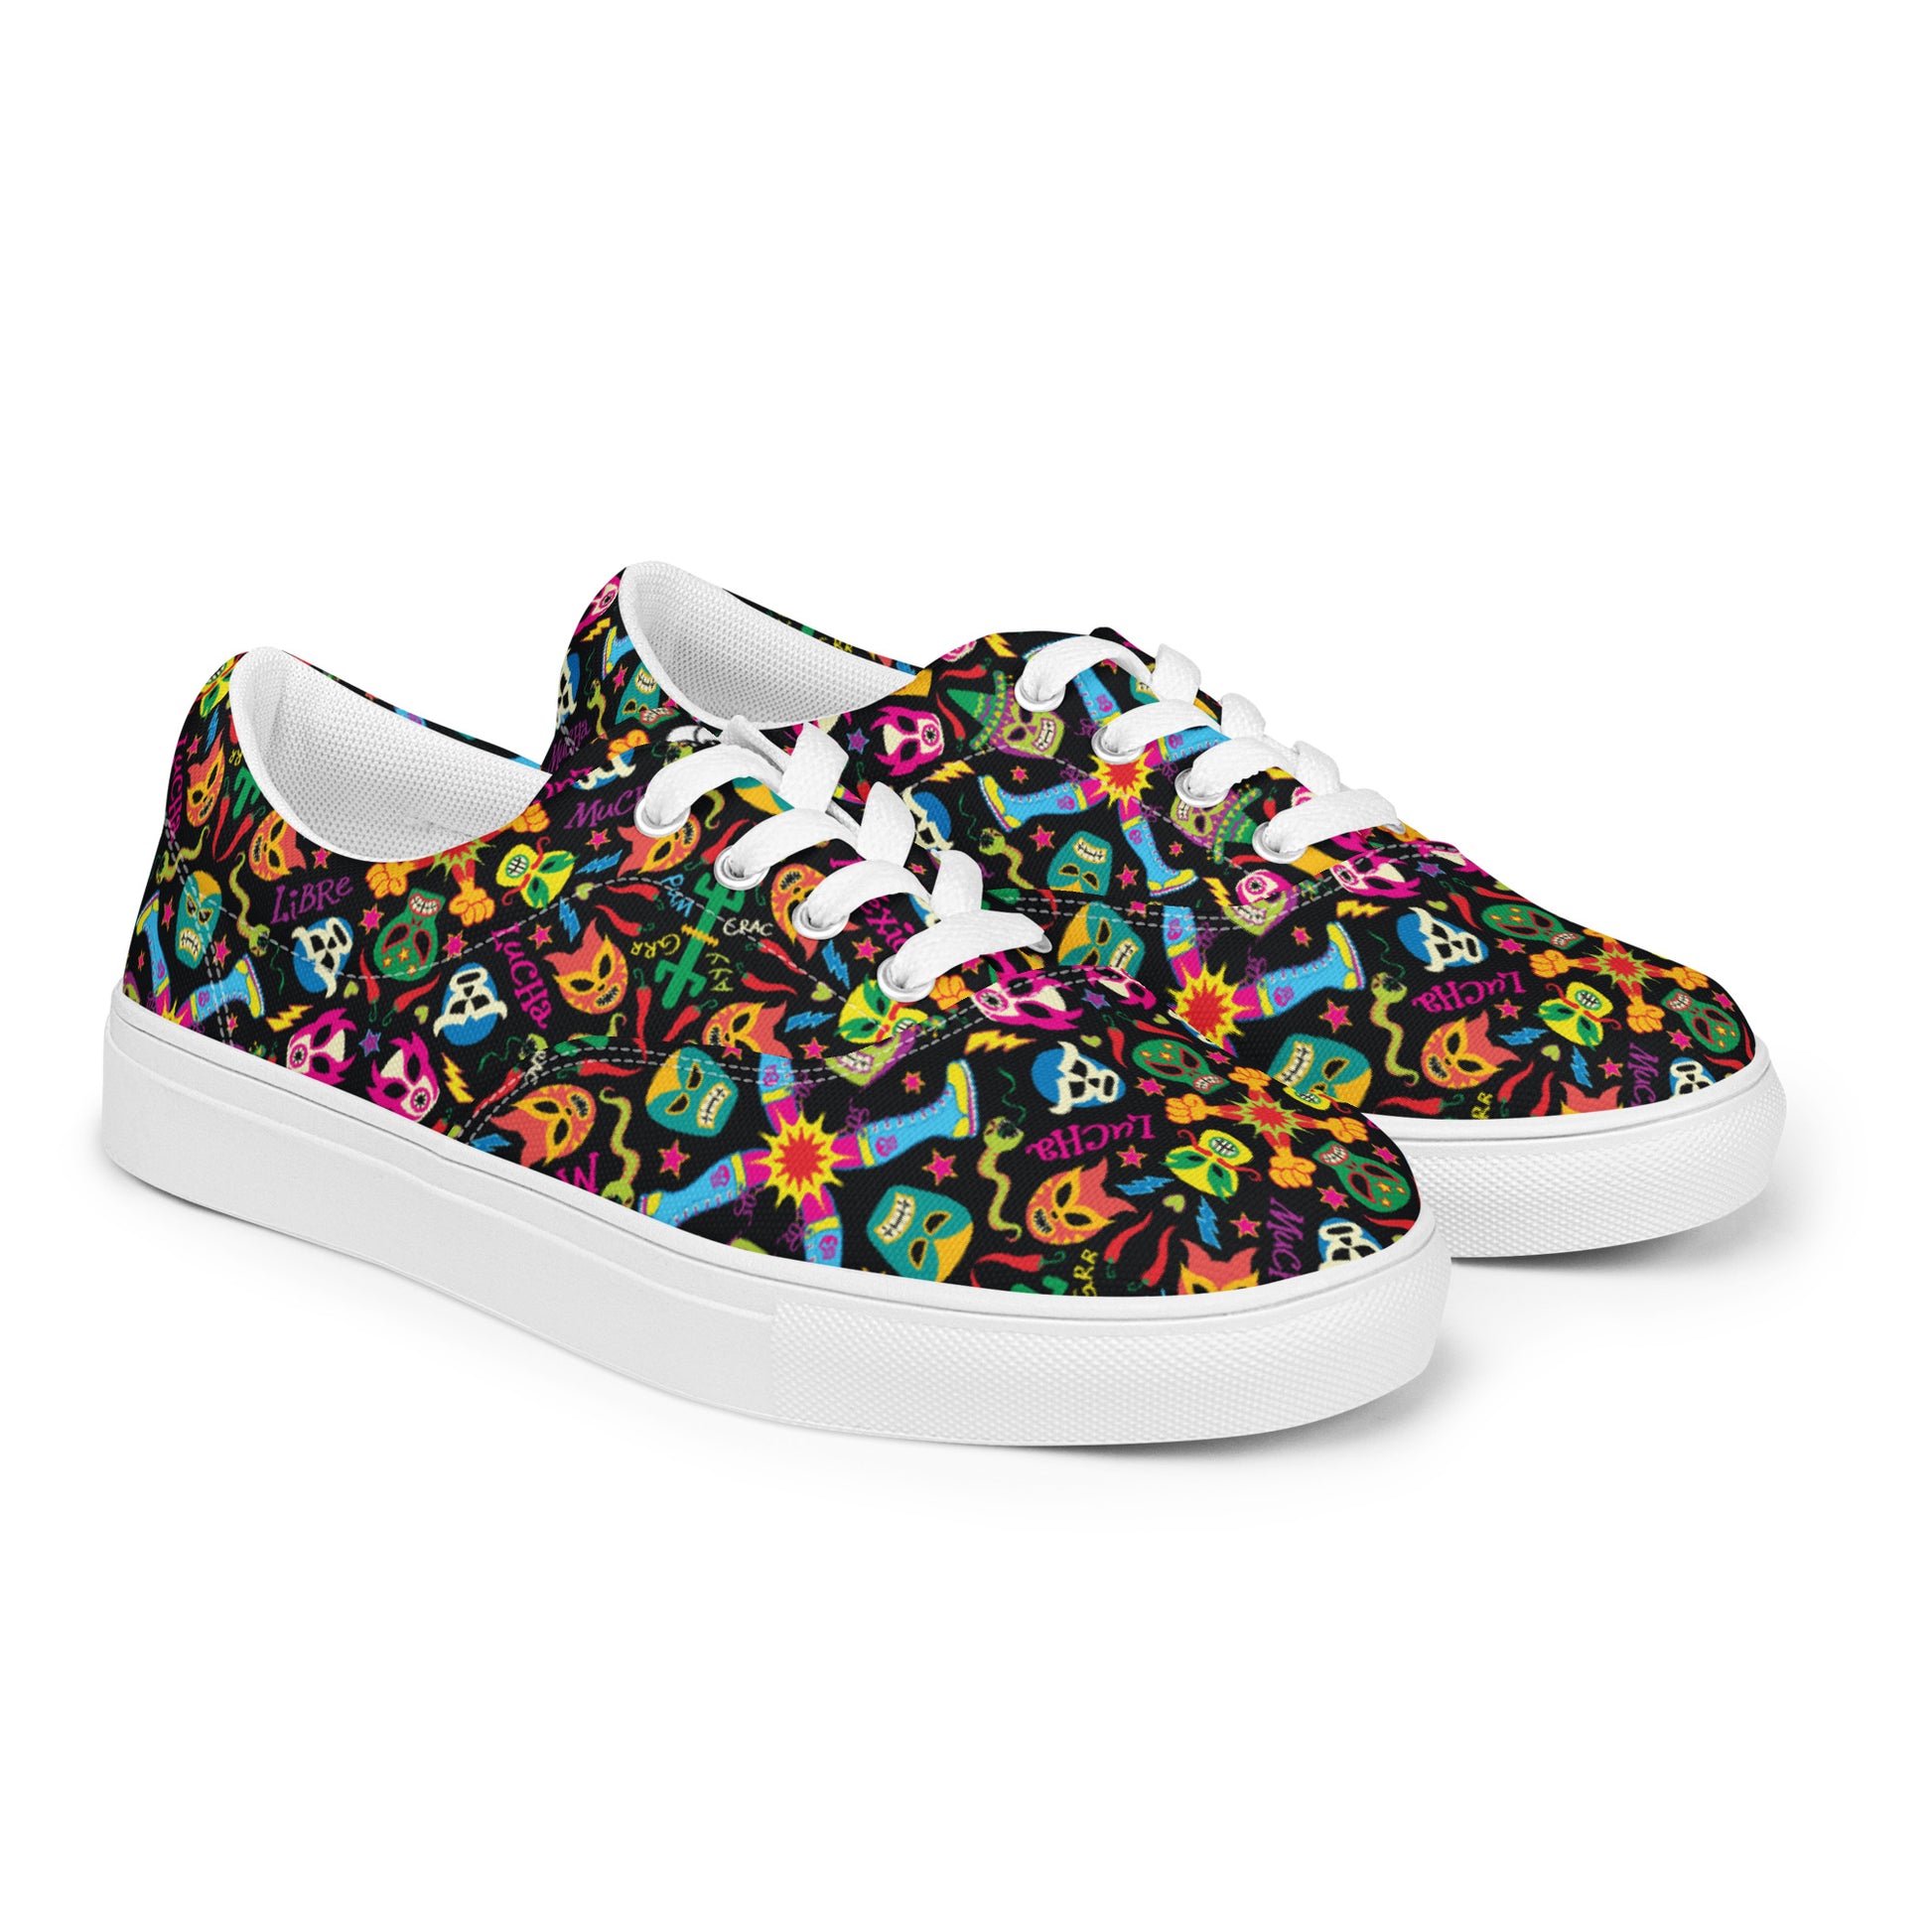 Mexican wrestling colorful party Women’s lace-up canvas shoes. Overview